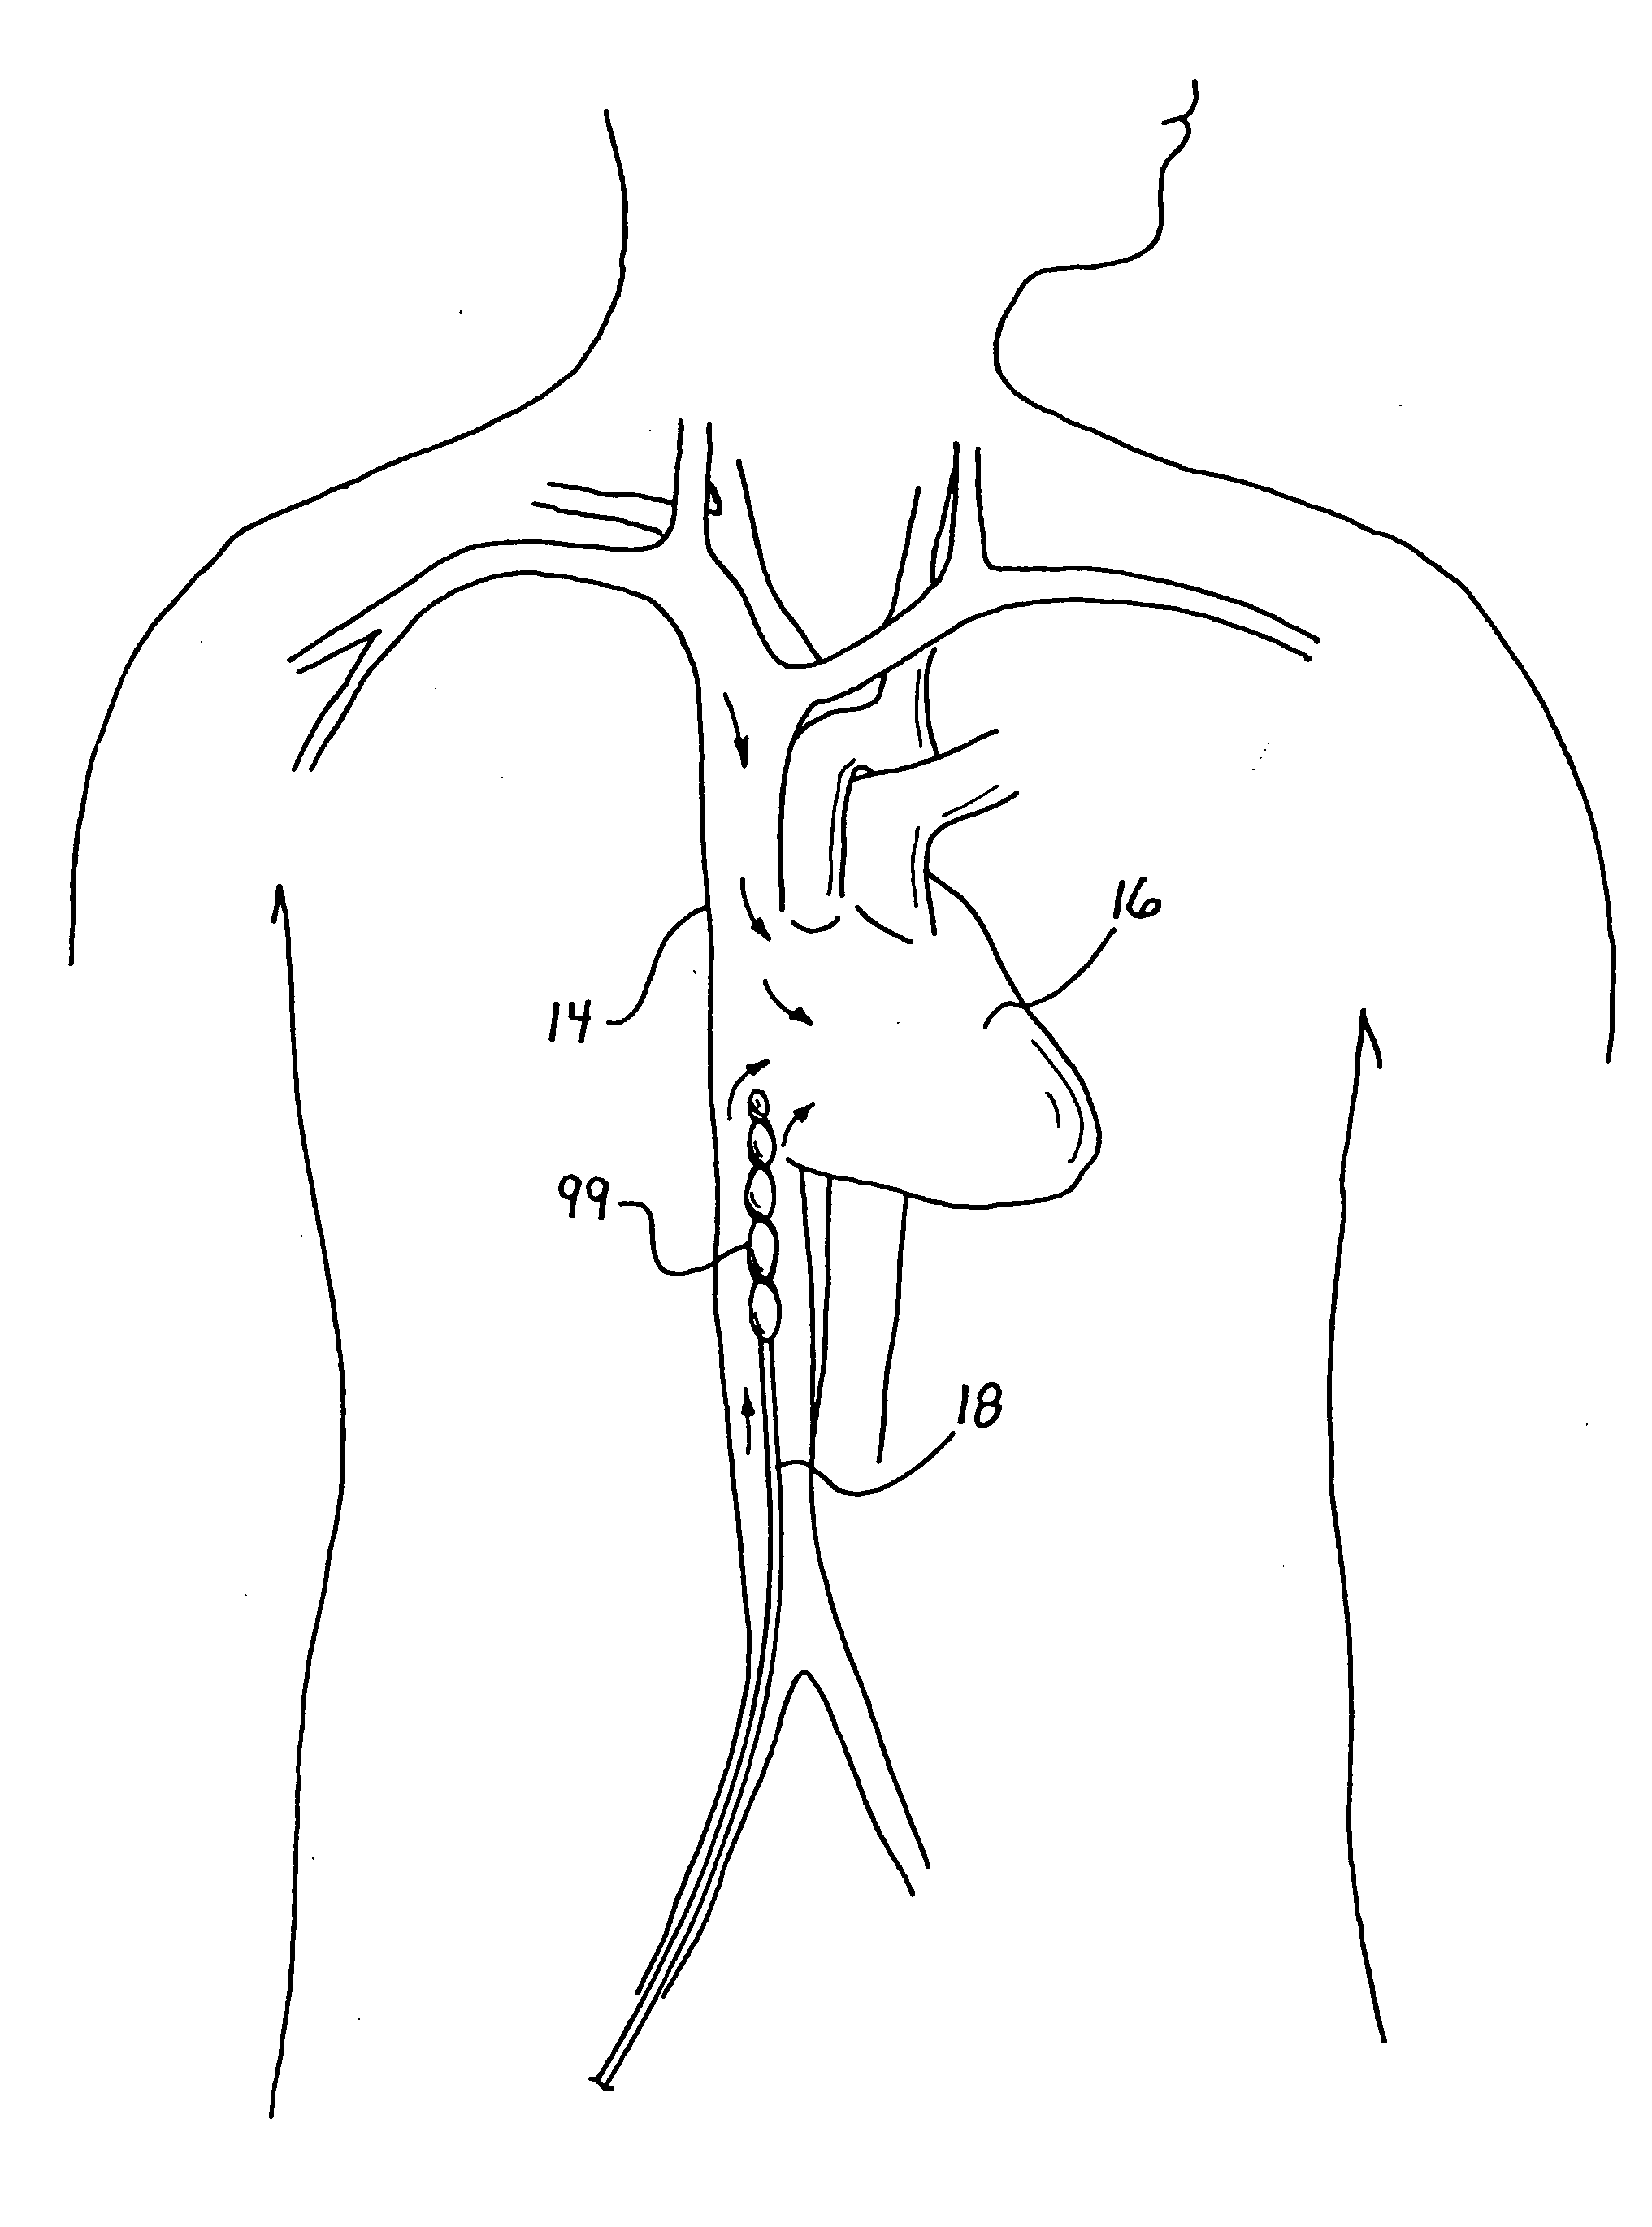 Method for reducing myocardial infarct by application of intravascular hypothermia